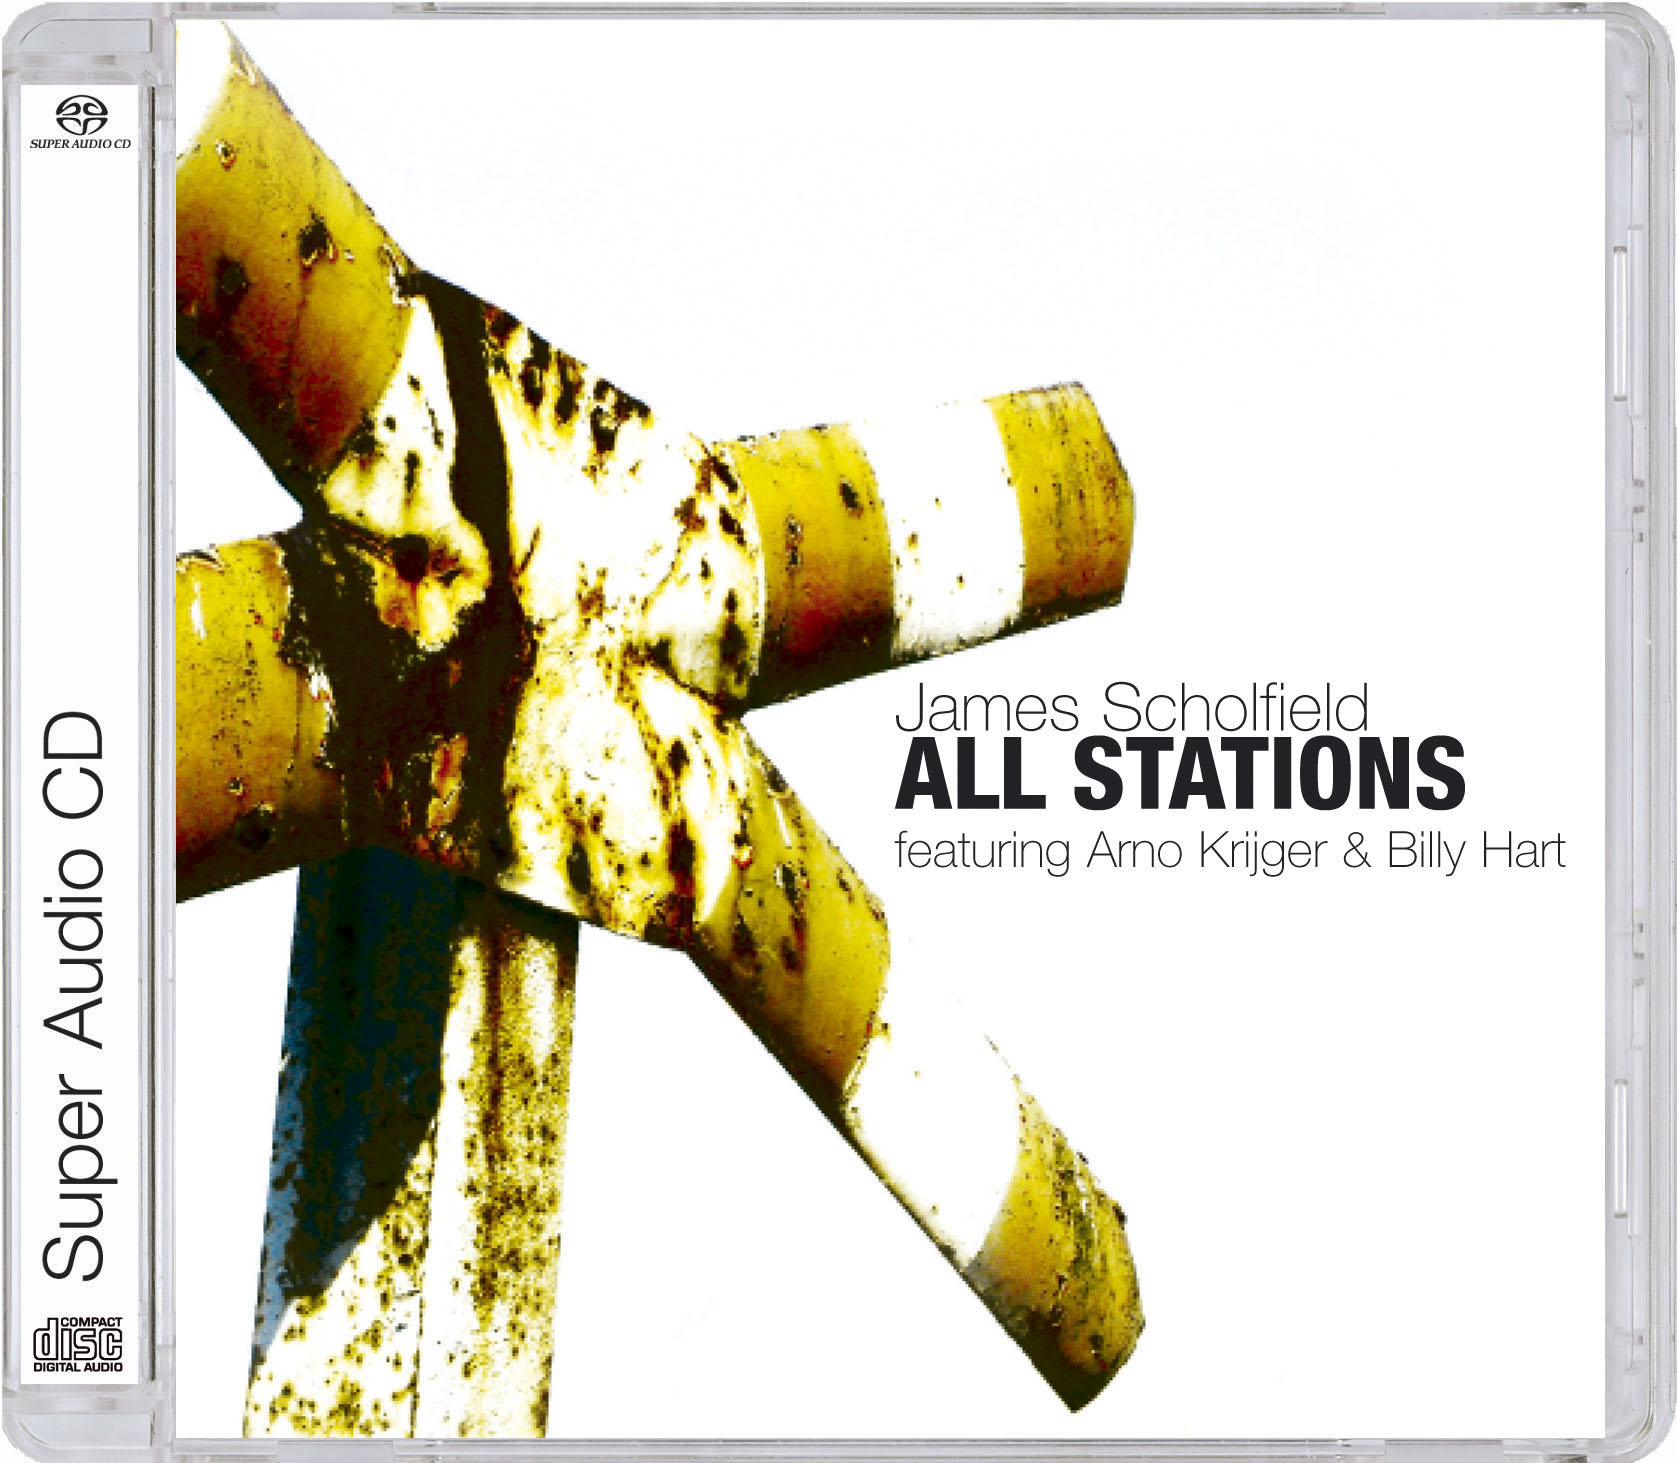 James Scholfield – All Stations (2004) MCH SACD ISO + Hi-Res FLAC